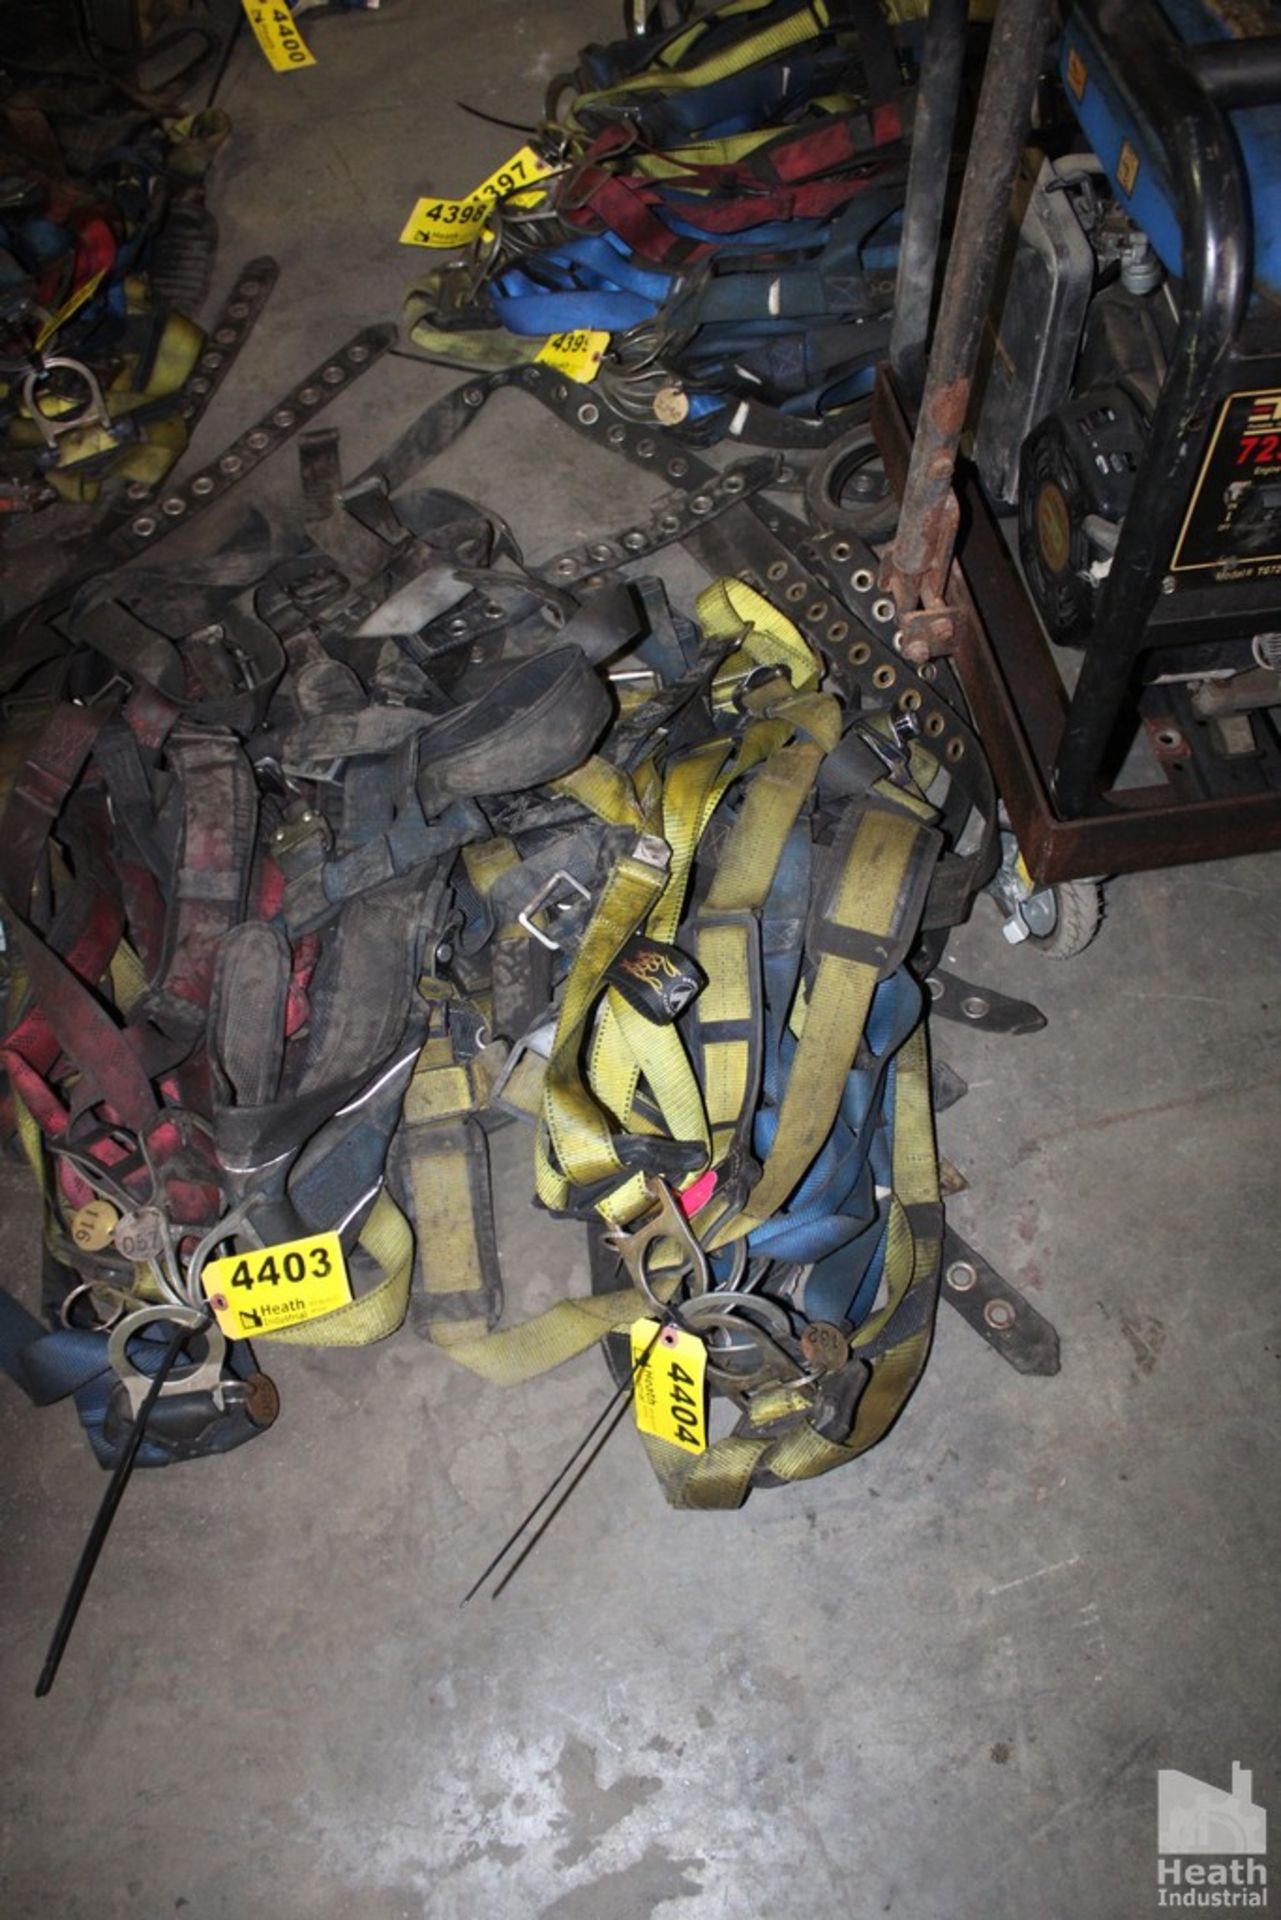 (5) SAFETY HARNESSES